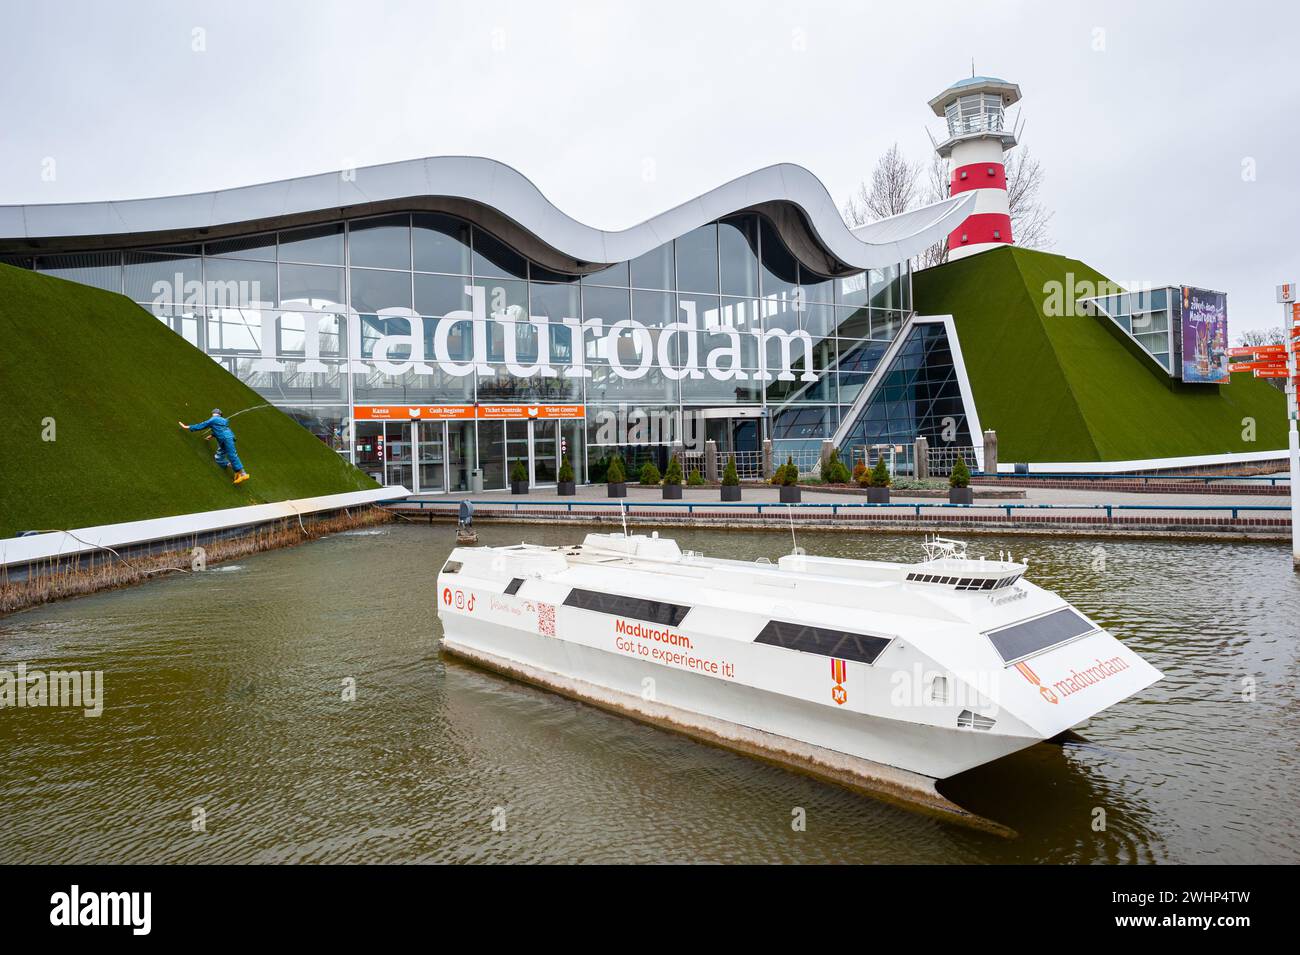 Entrance to miniature city Madurodam with small cruise ship in the foreground in city of The Hague, Netherlands. Stock Photo